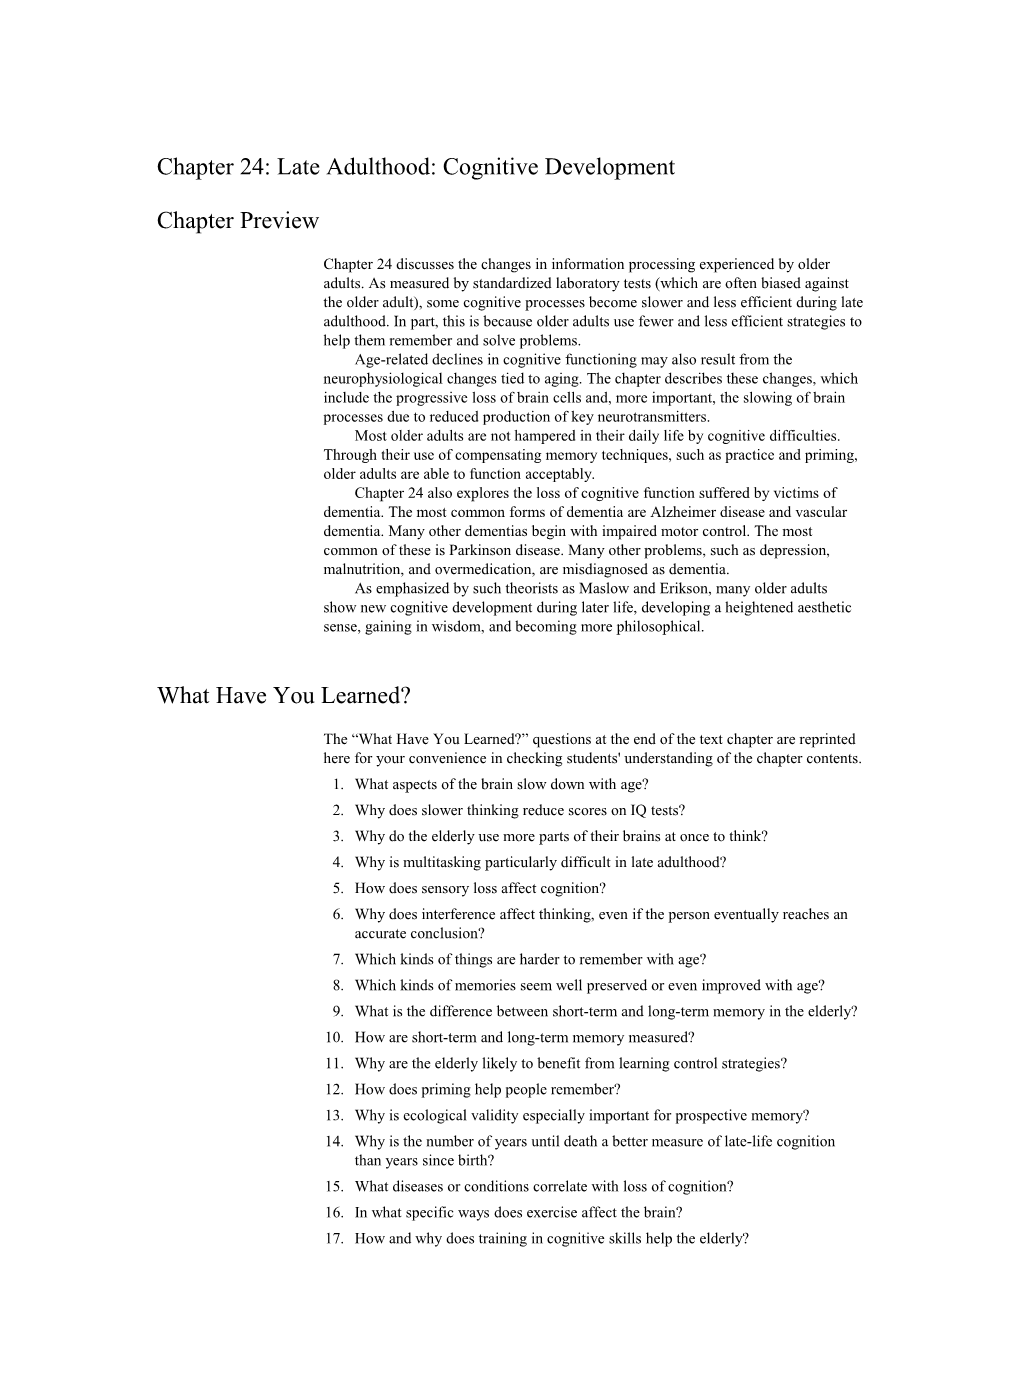 Chapter 24: Late Adulthood: Cognitive Development